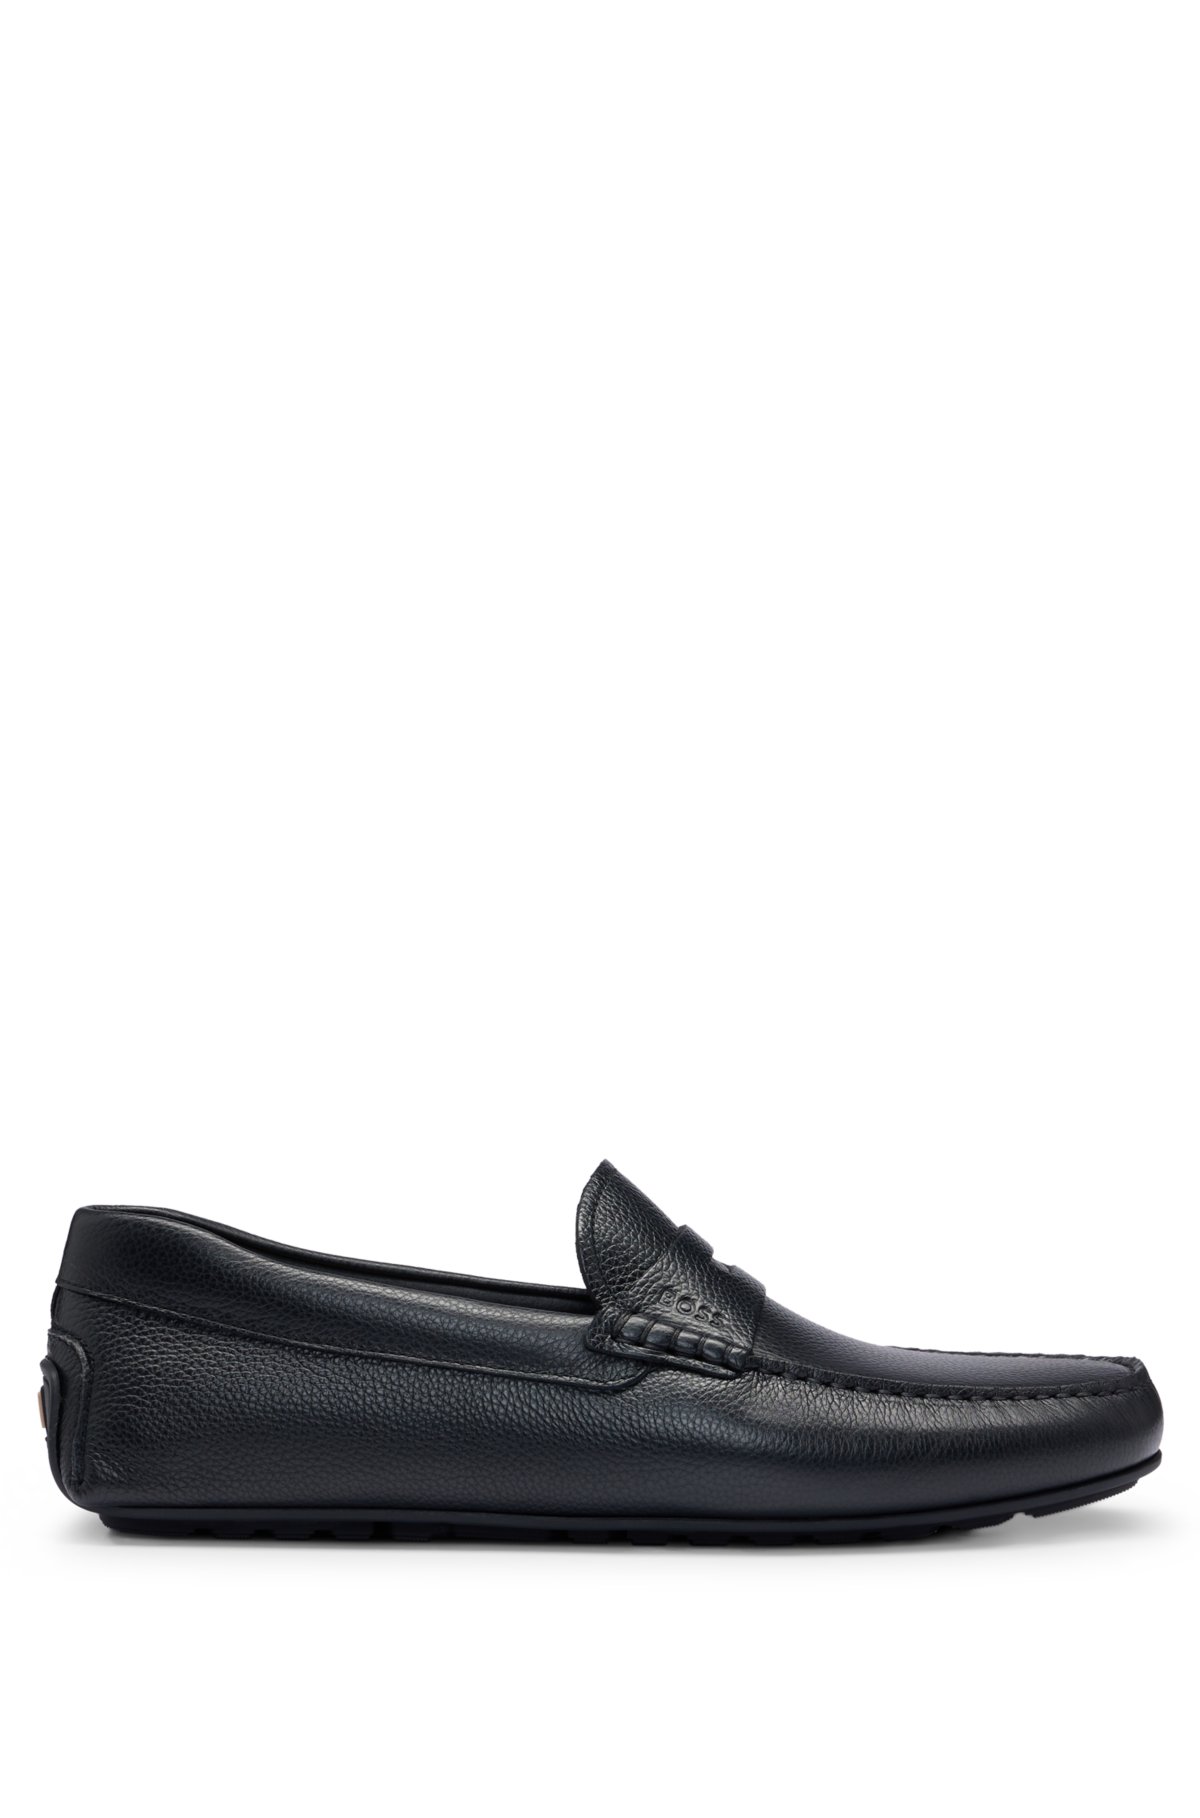 Grained-leather driver moccasins with logo strap, Black